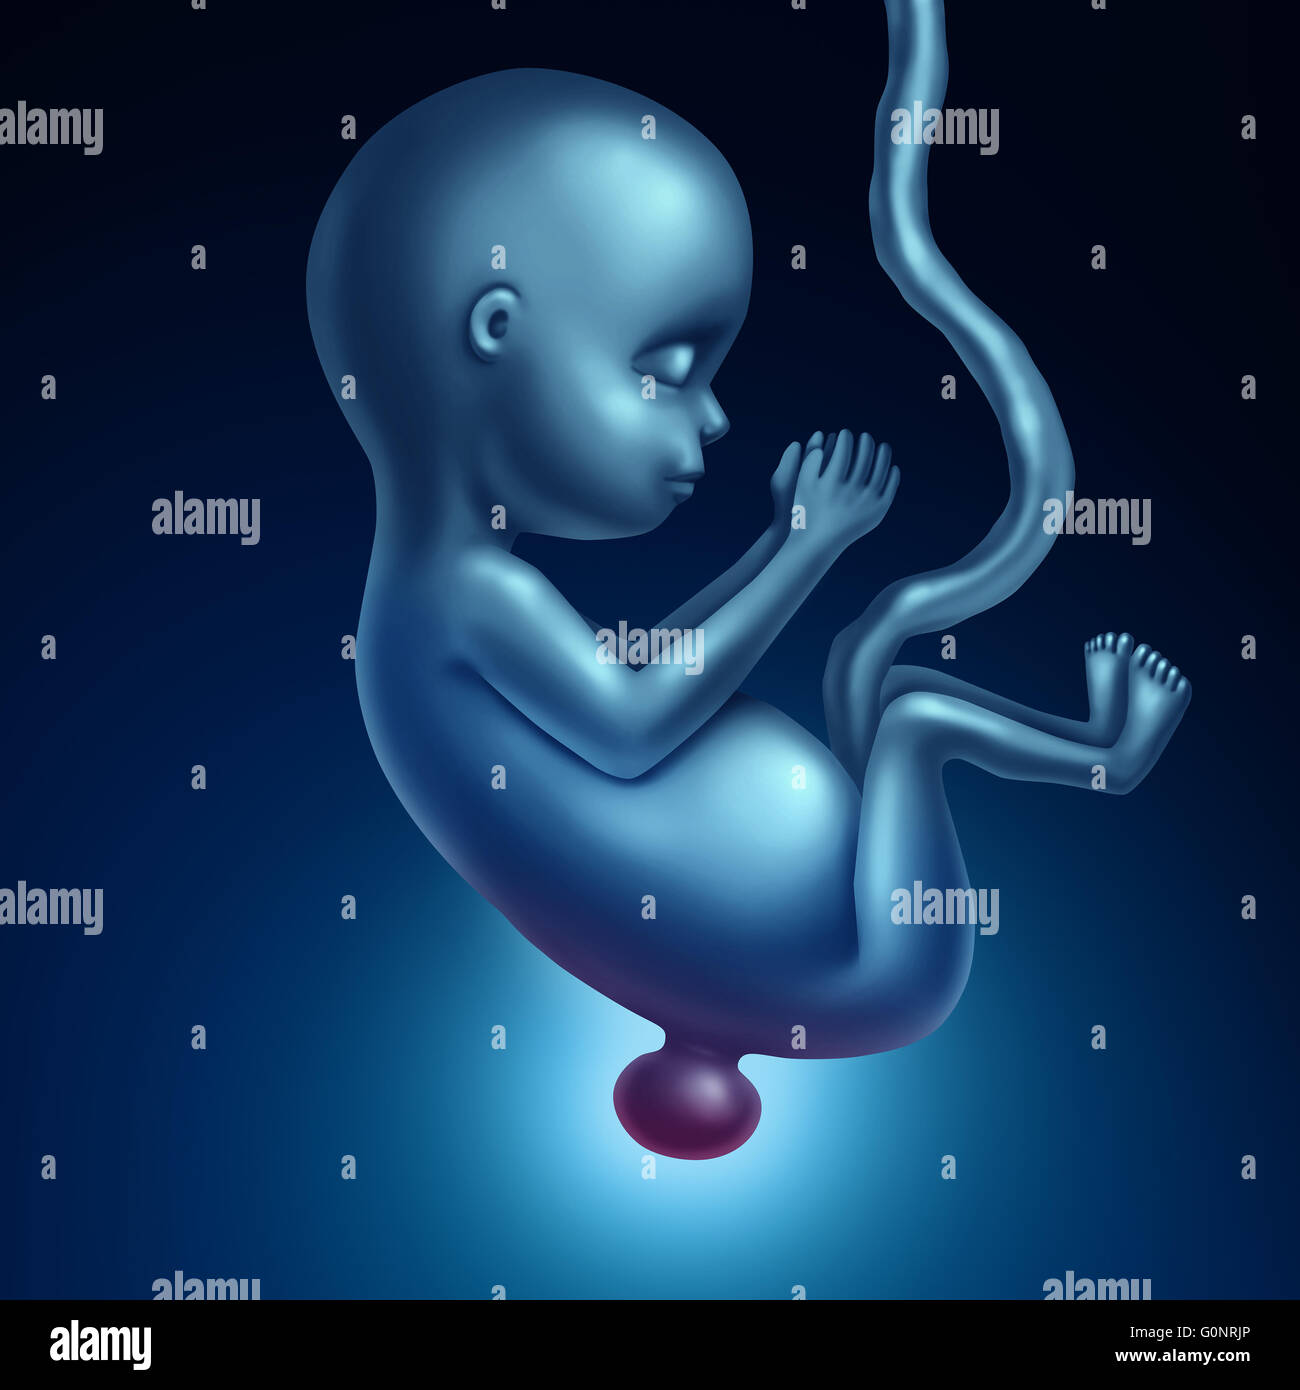 Spina bifida birth defect medical concept as a malformation in the anatomy of a fetus with swelling in the lower spinal area as Stock Photo